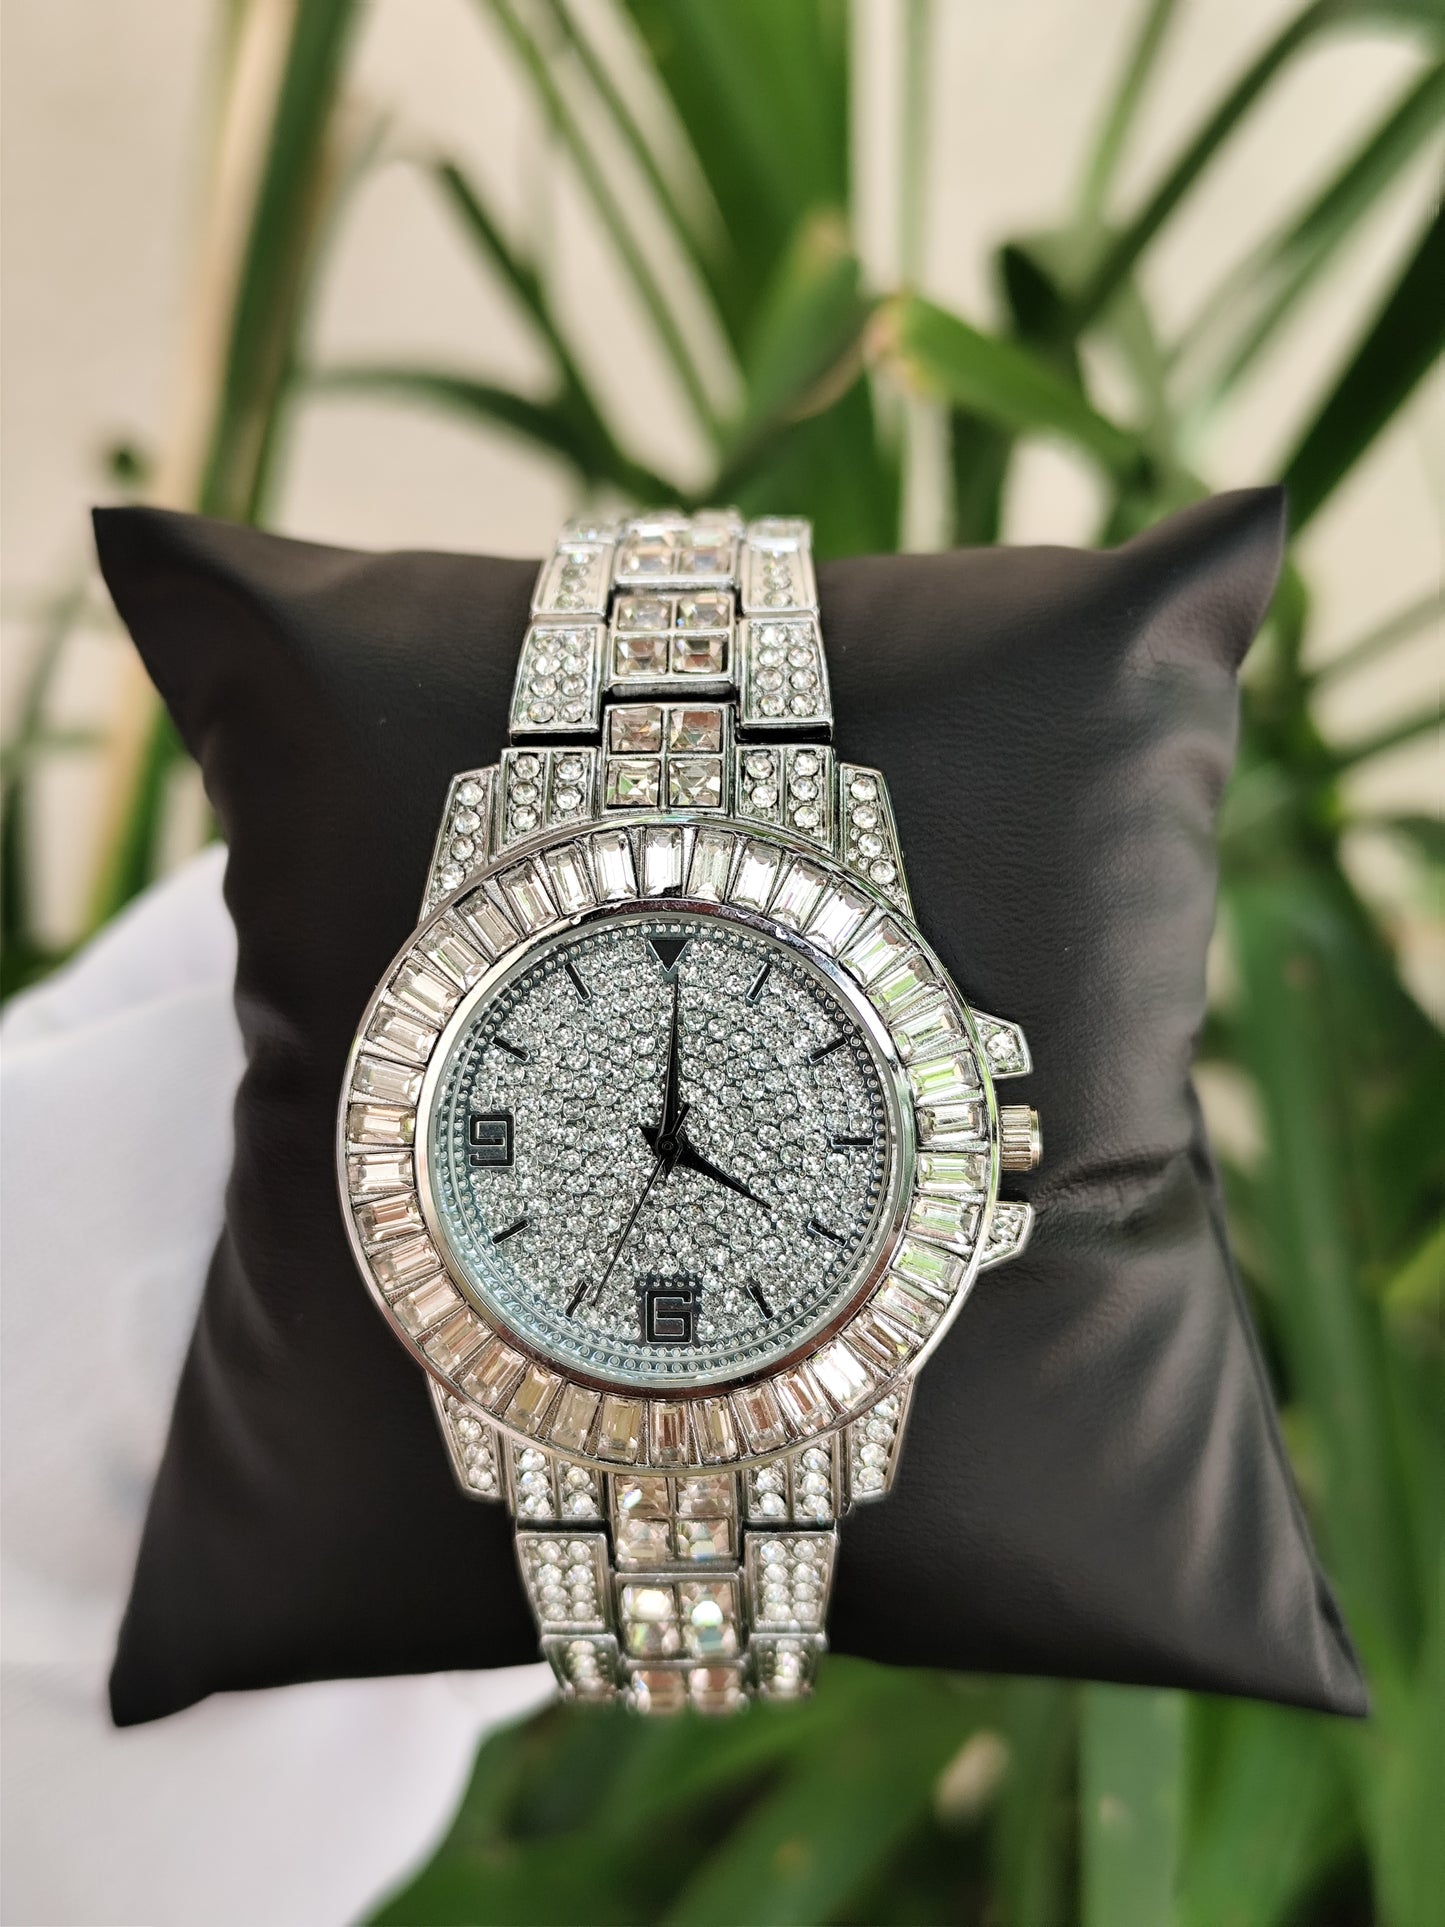 Brazalete Diamonds square - Iced Out Watches